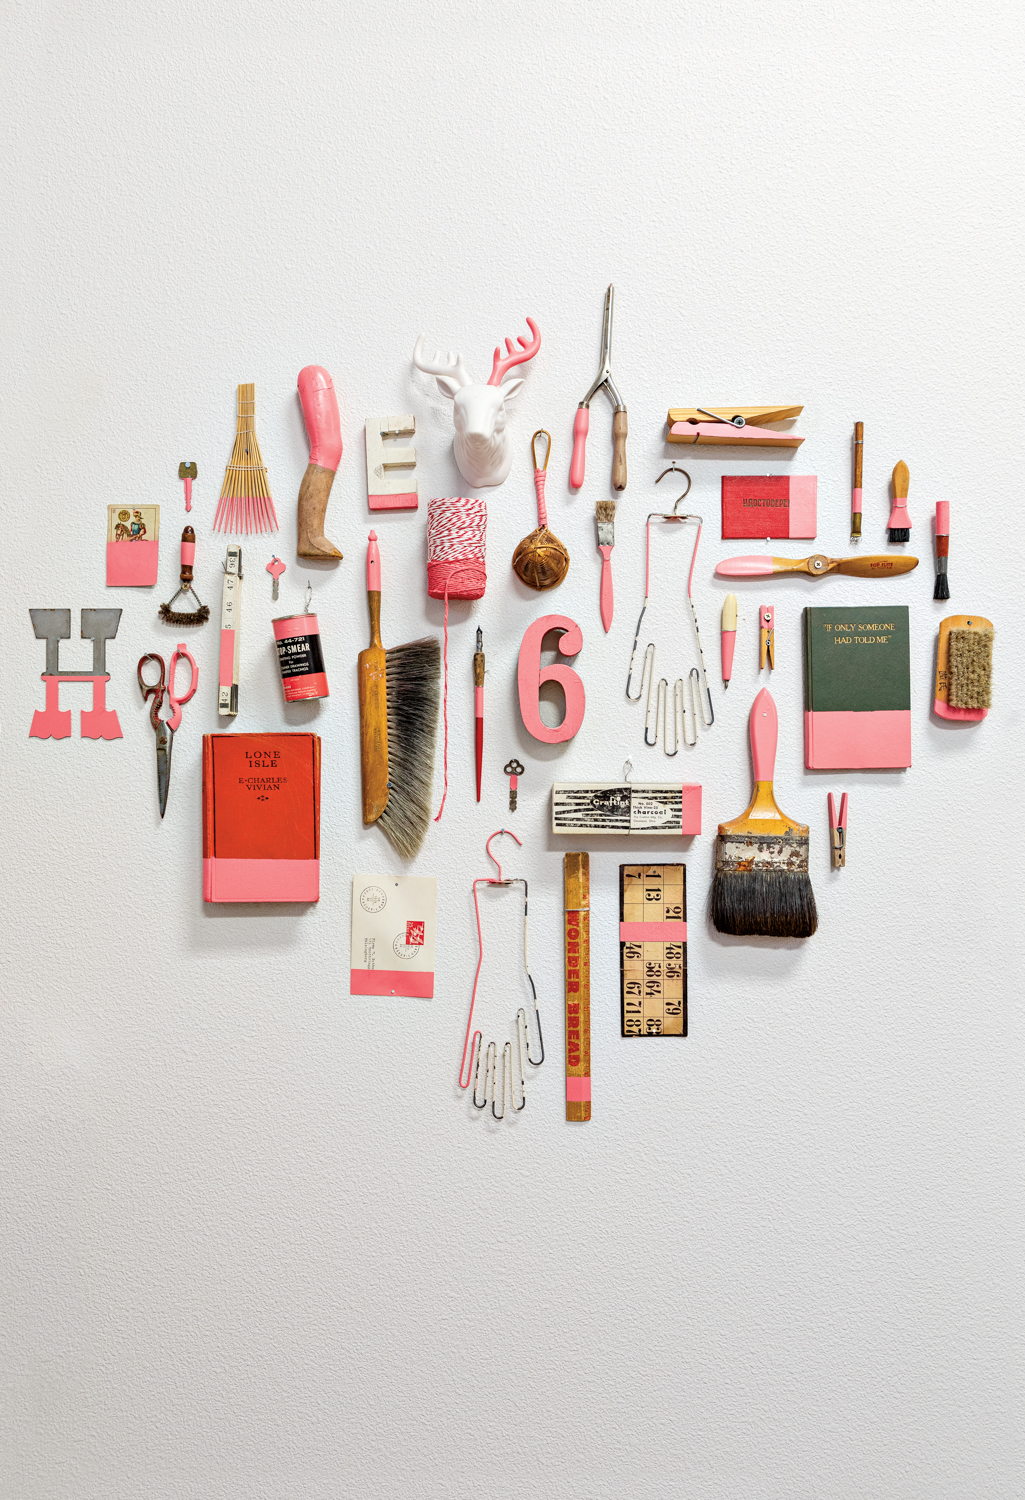 A collection of pink-hued items hangs on the wall of Congdon's studio.